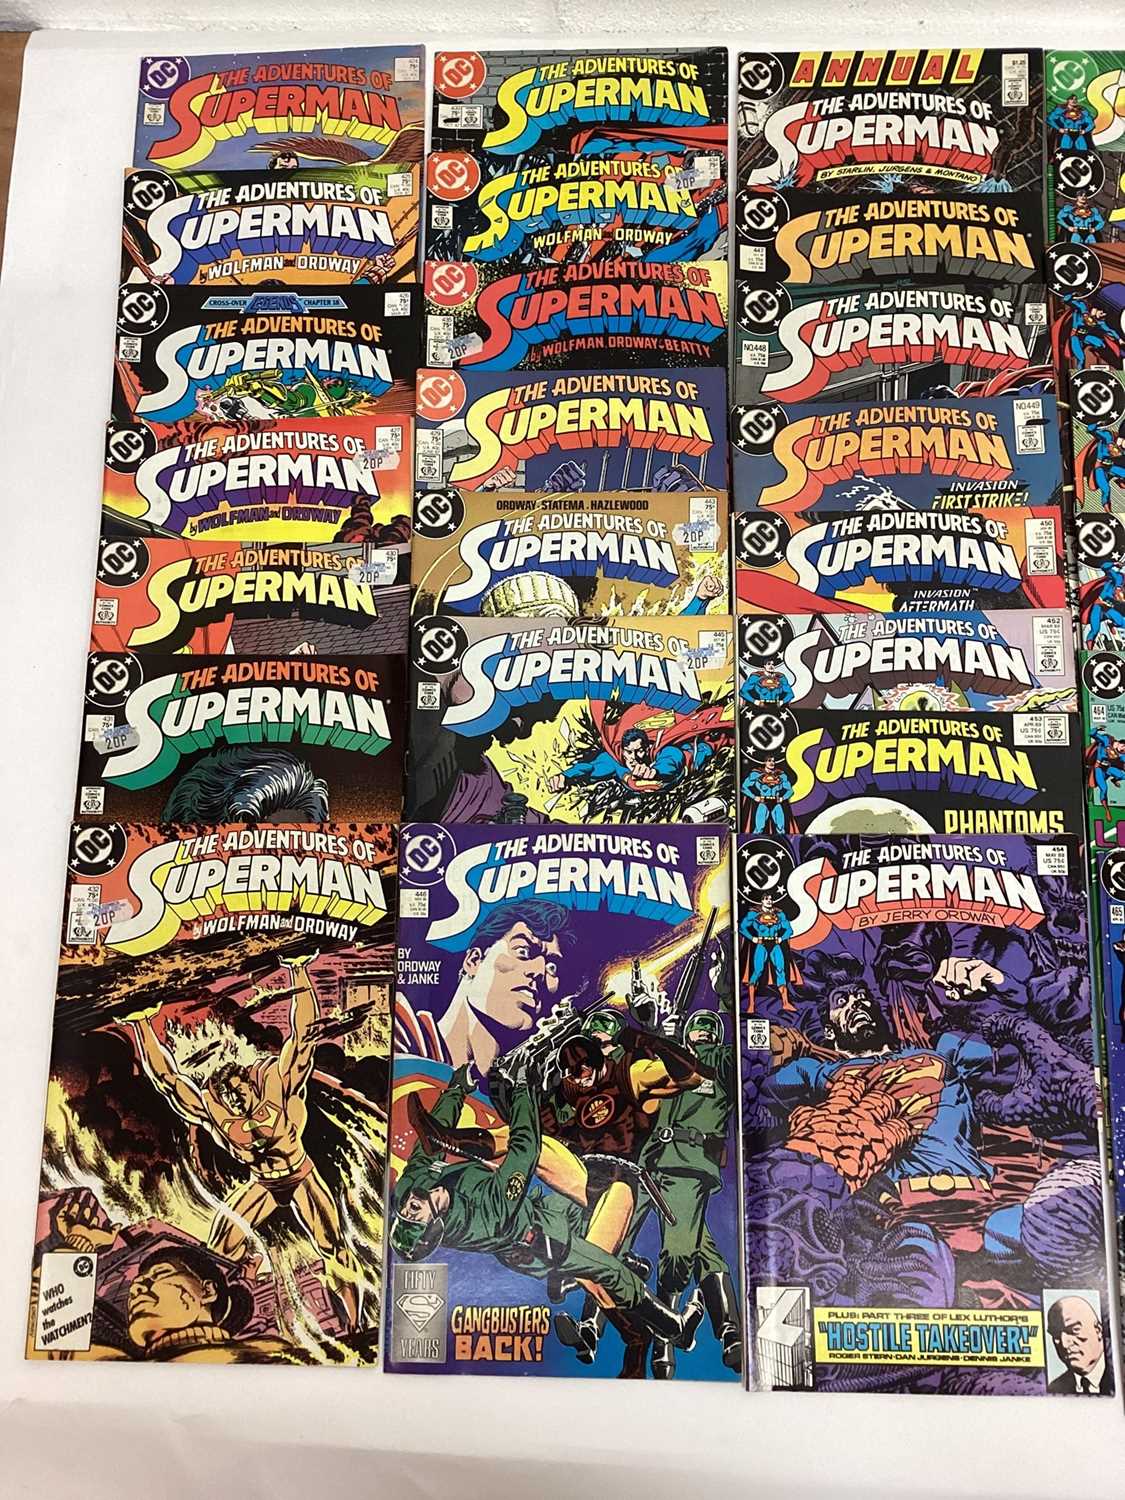 Large quantity of DC Comics, The Adventures of Superman - Image 2 of 9